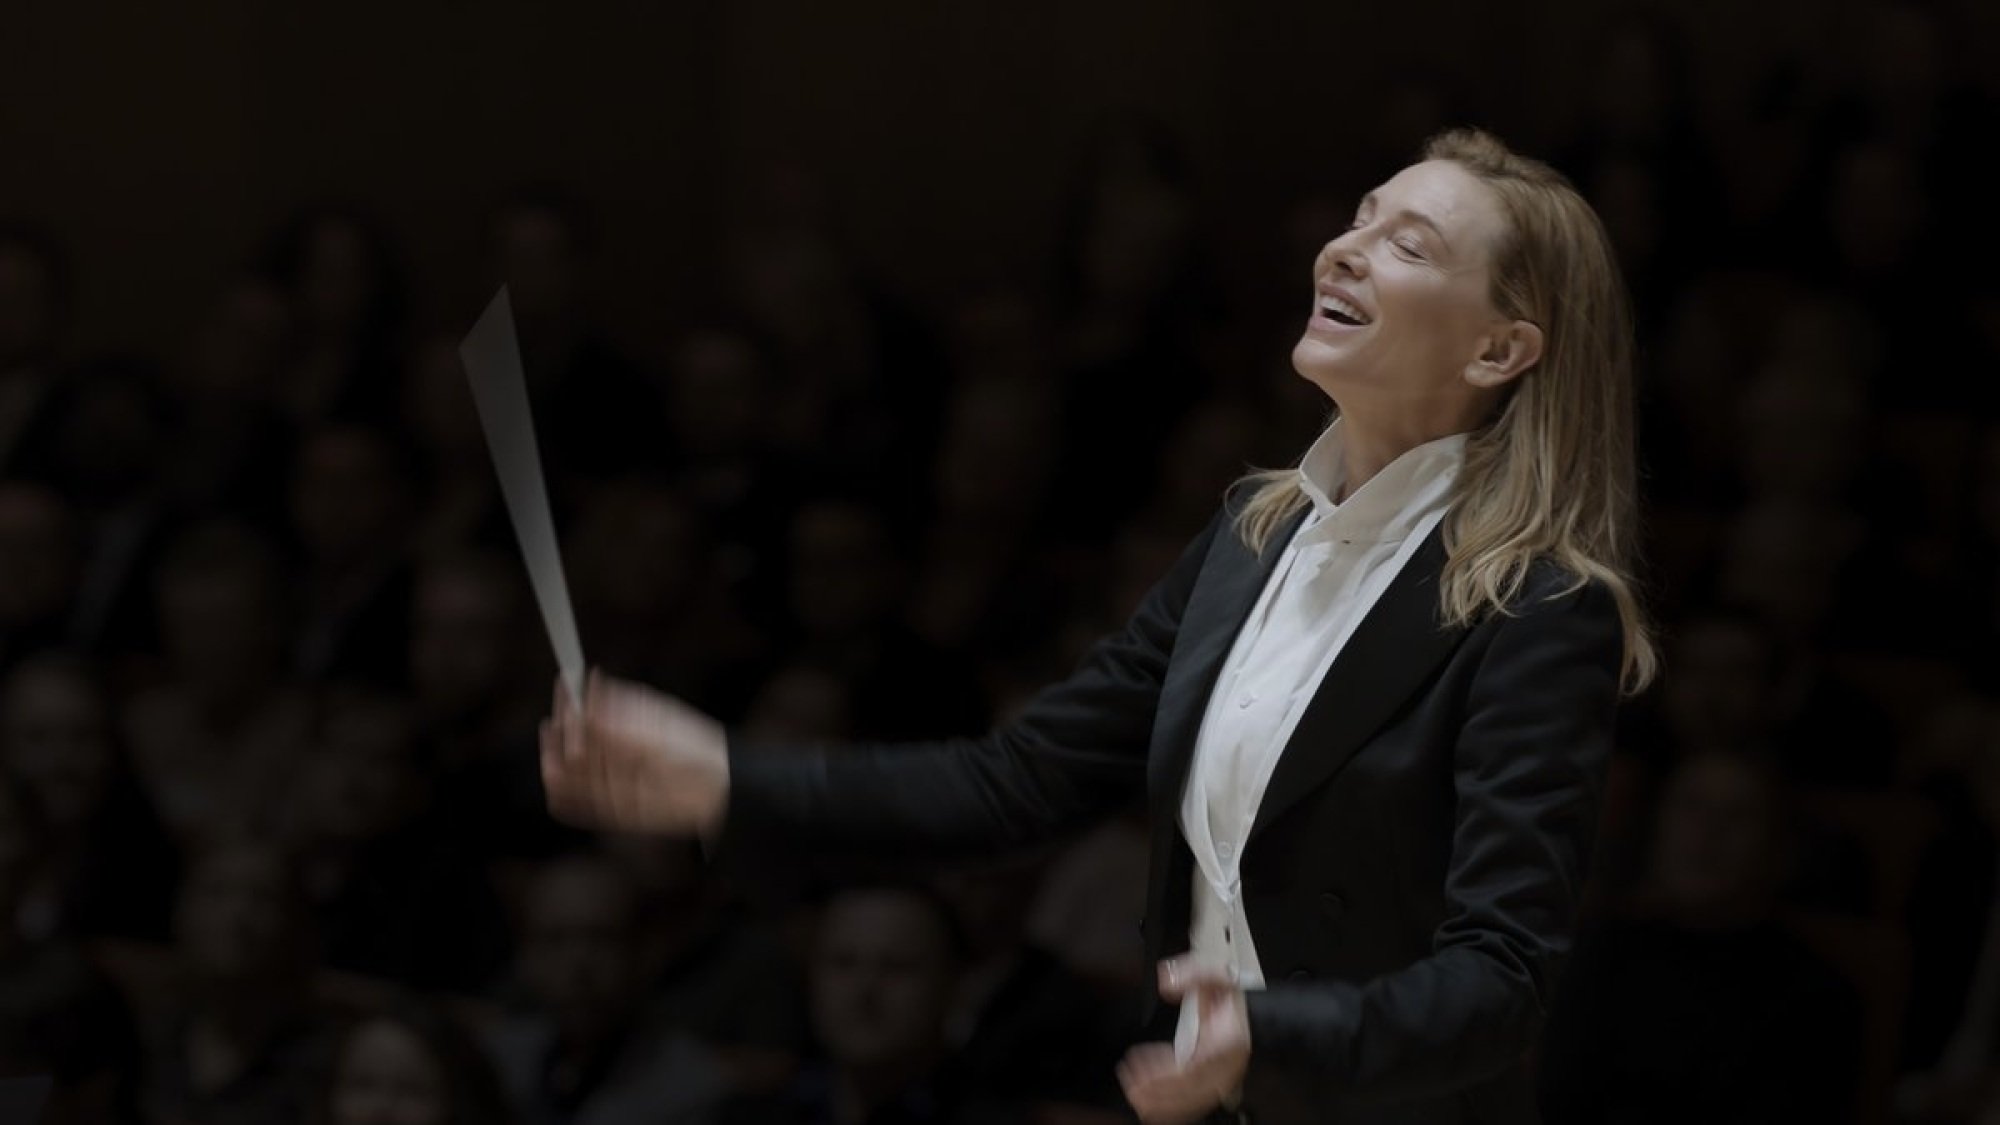 A woman in a suit conducts an orchestra.